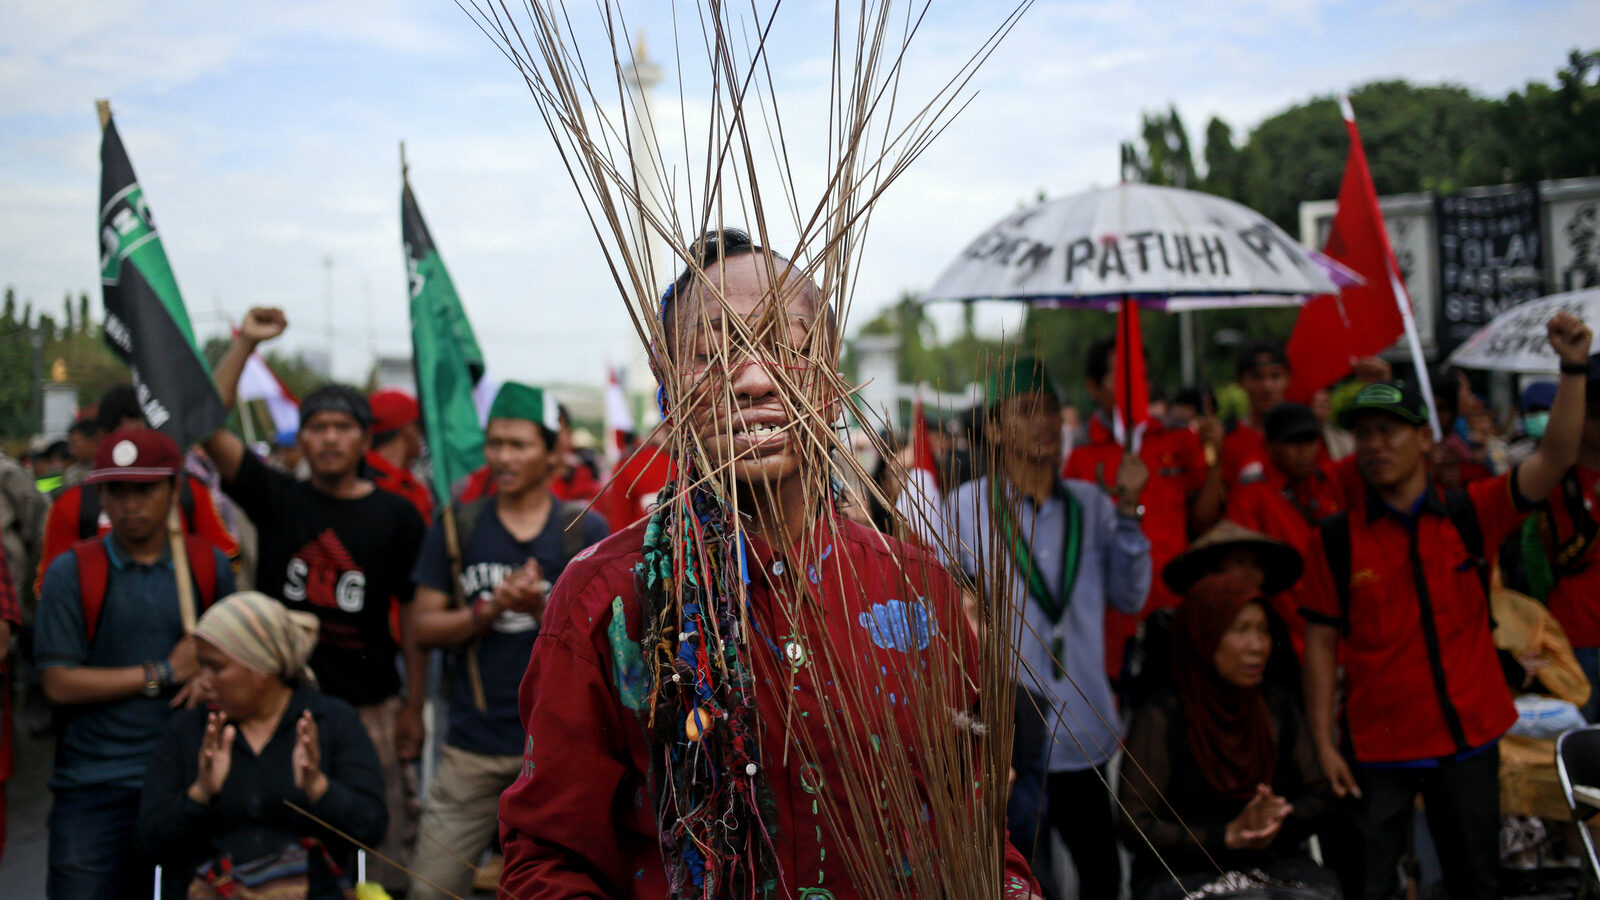 In this March 20, 2017 photo, an activist has skewers wrapped around his head with rubber bands during a rally against the operation of a cement factory in Kendeng, West Java, outside the presidential palace in Jakarta, Indonesia. Kendeng farmers have battled against plans for the factory for years, saying it could taint their water. The factory is now more or less complete and the owner, state-owned PT Semen Indonesia, has said it would create jobs and boost the local economy. (AP/Dita Alangkara)